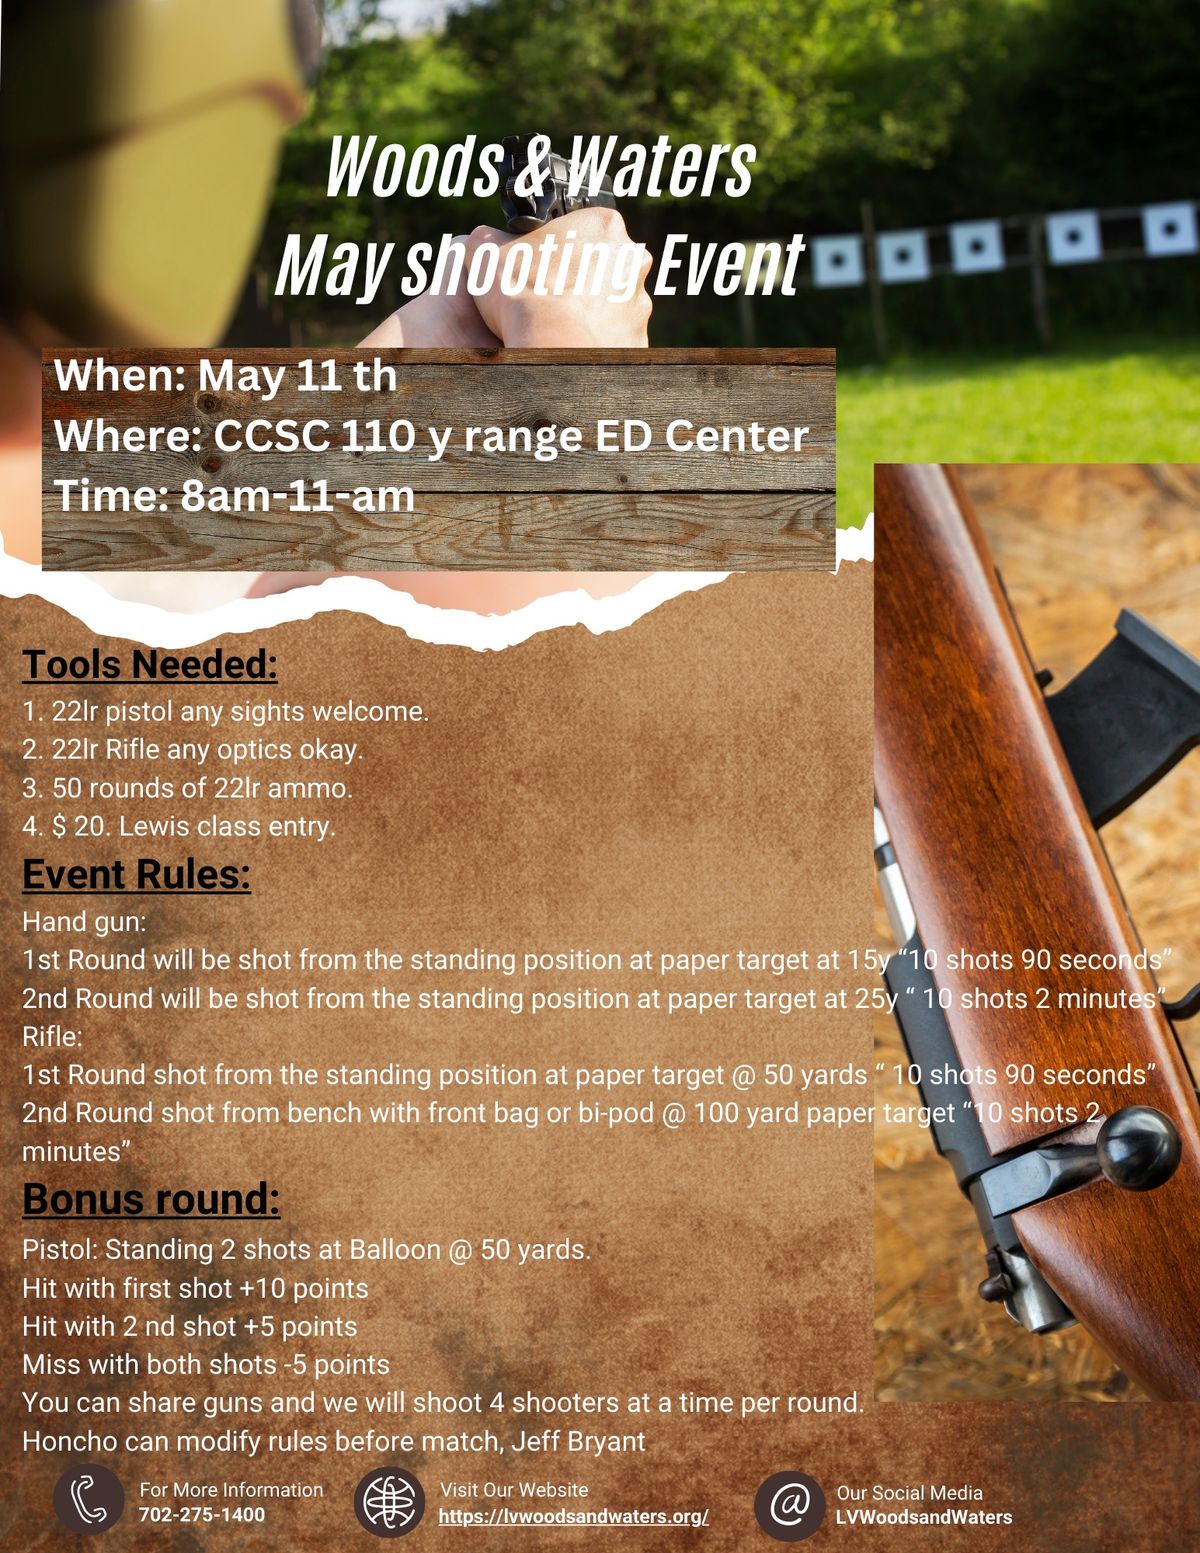 Woods & Waters May shooting Event